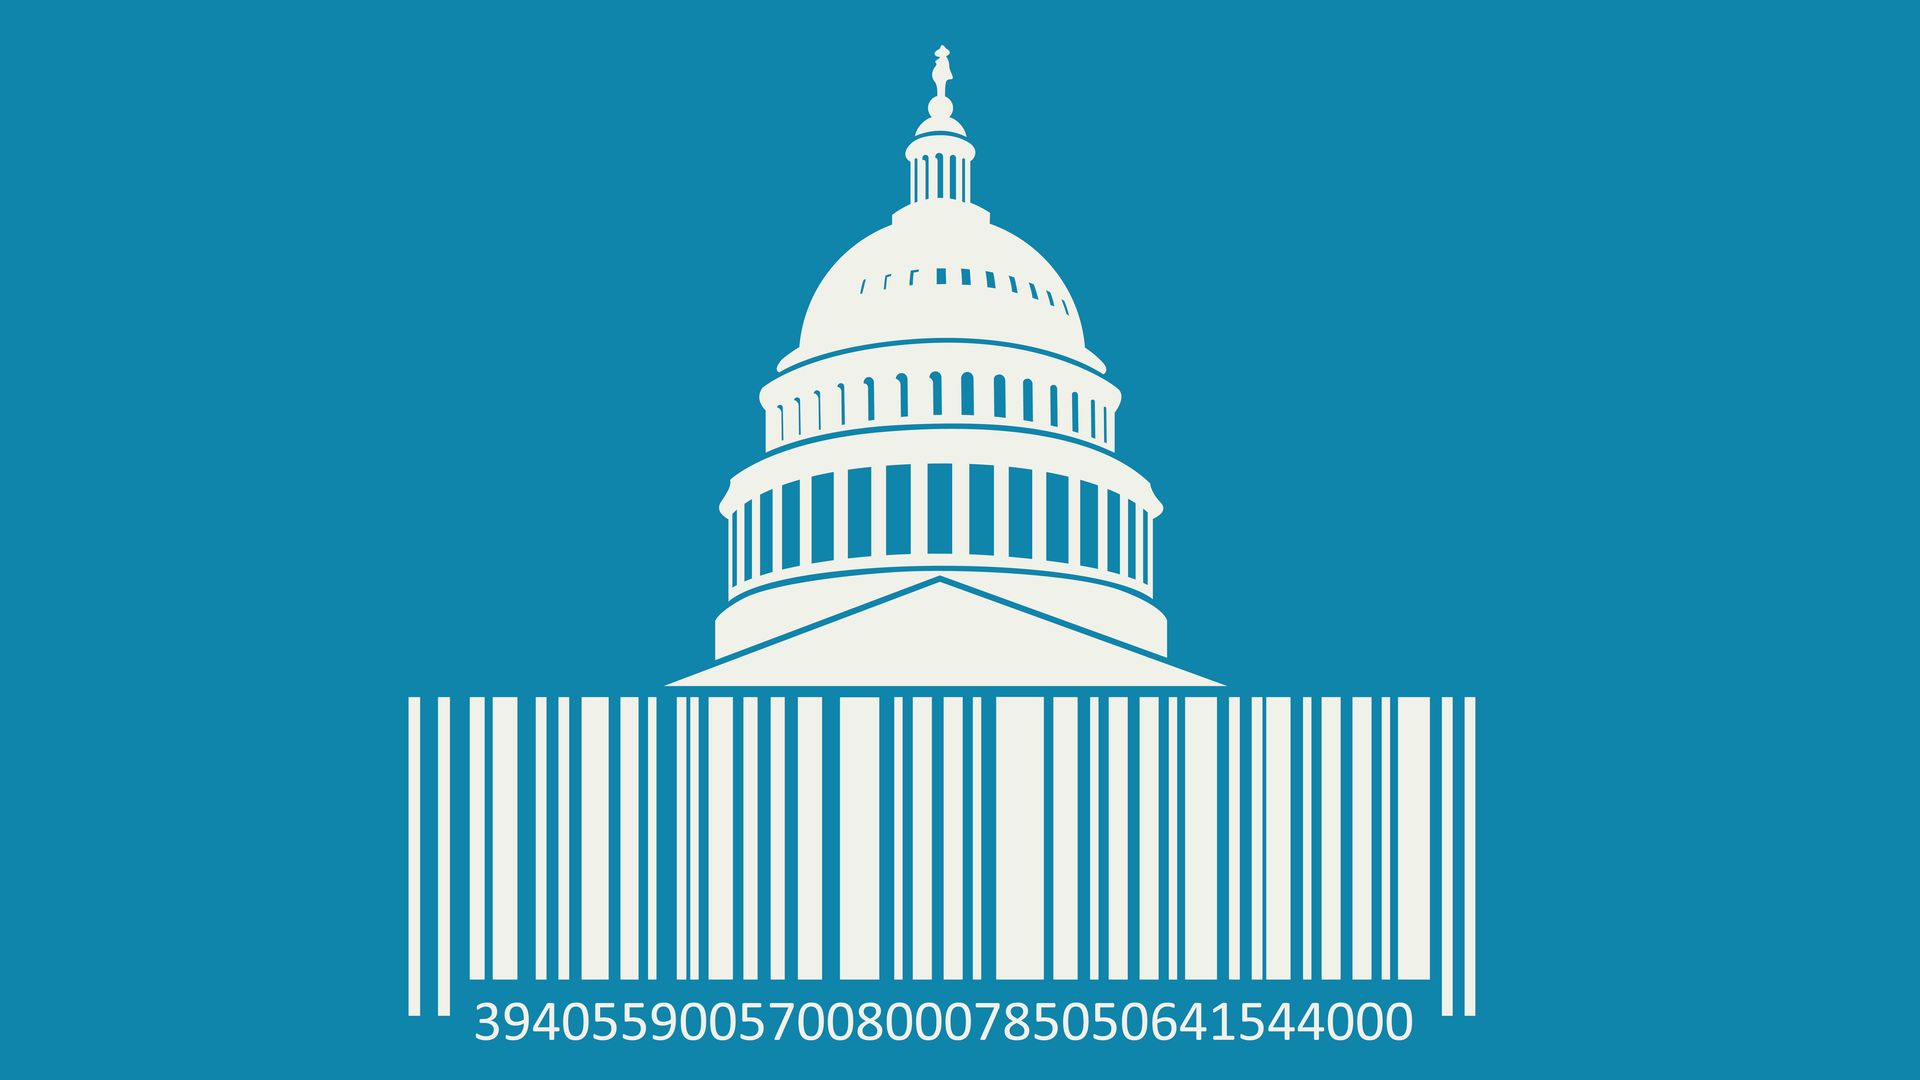 Illustration of the US Capitol building made of a barcode.